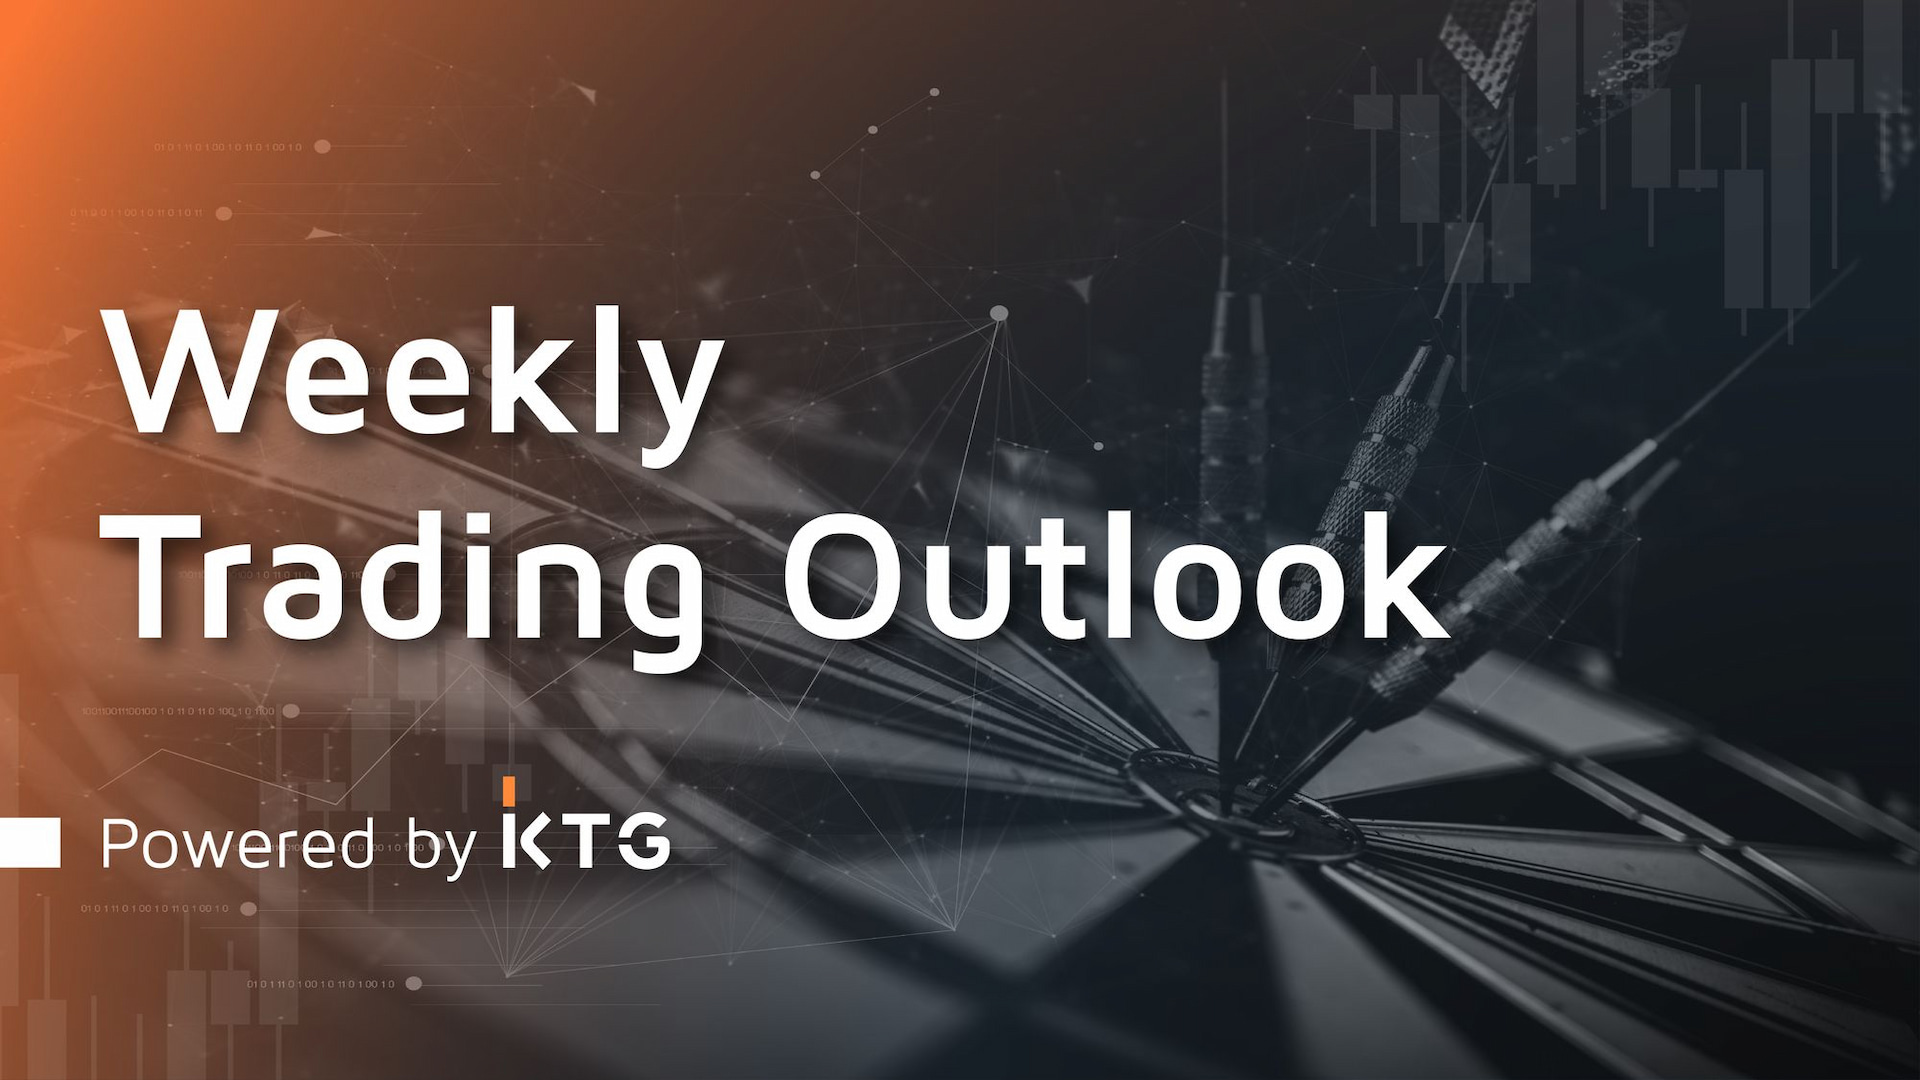 Range-bound trading continues? - Powered by KTG